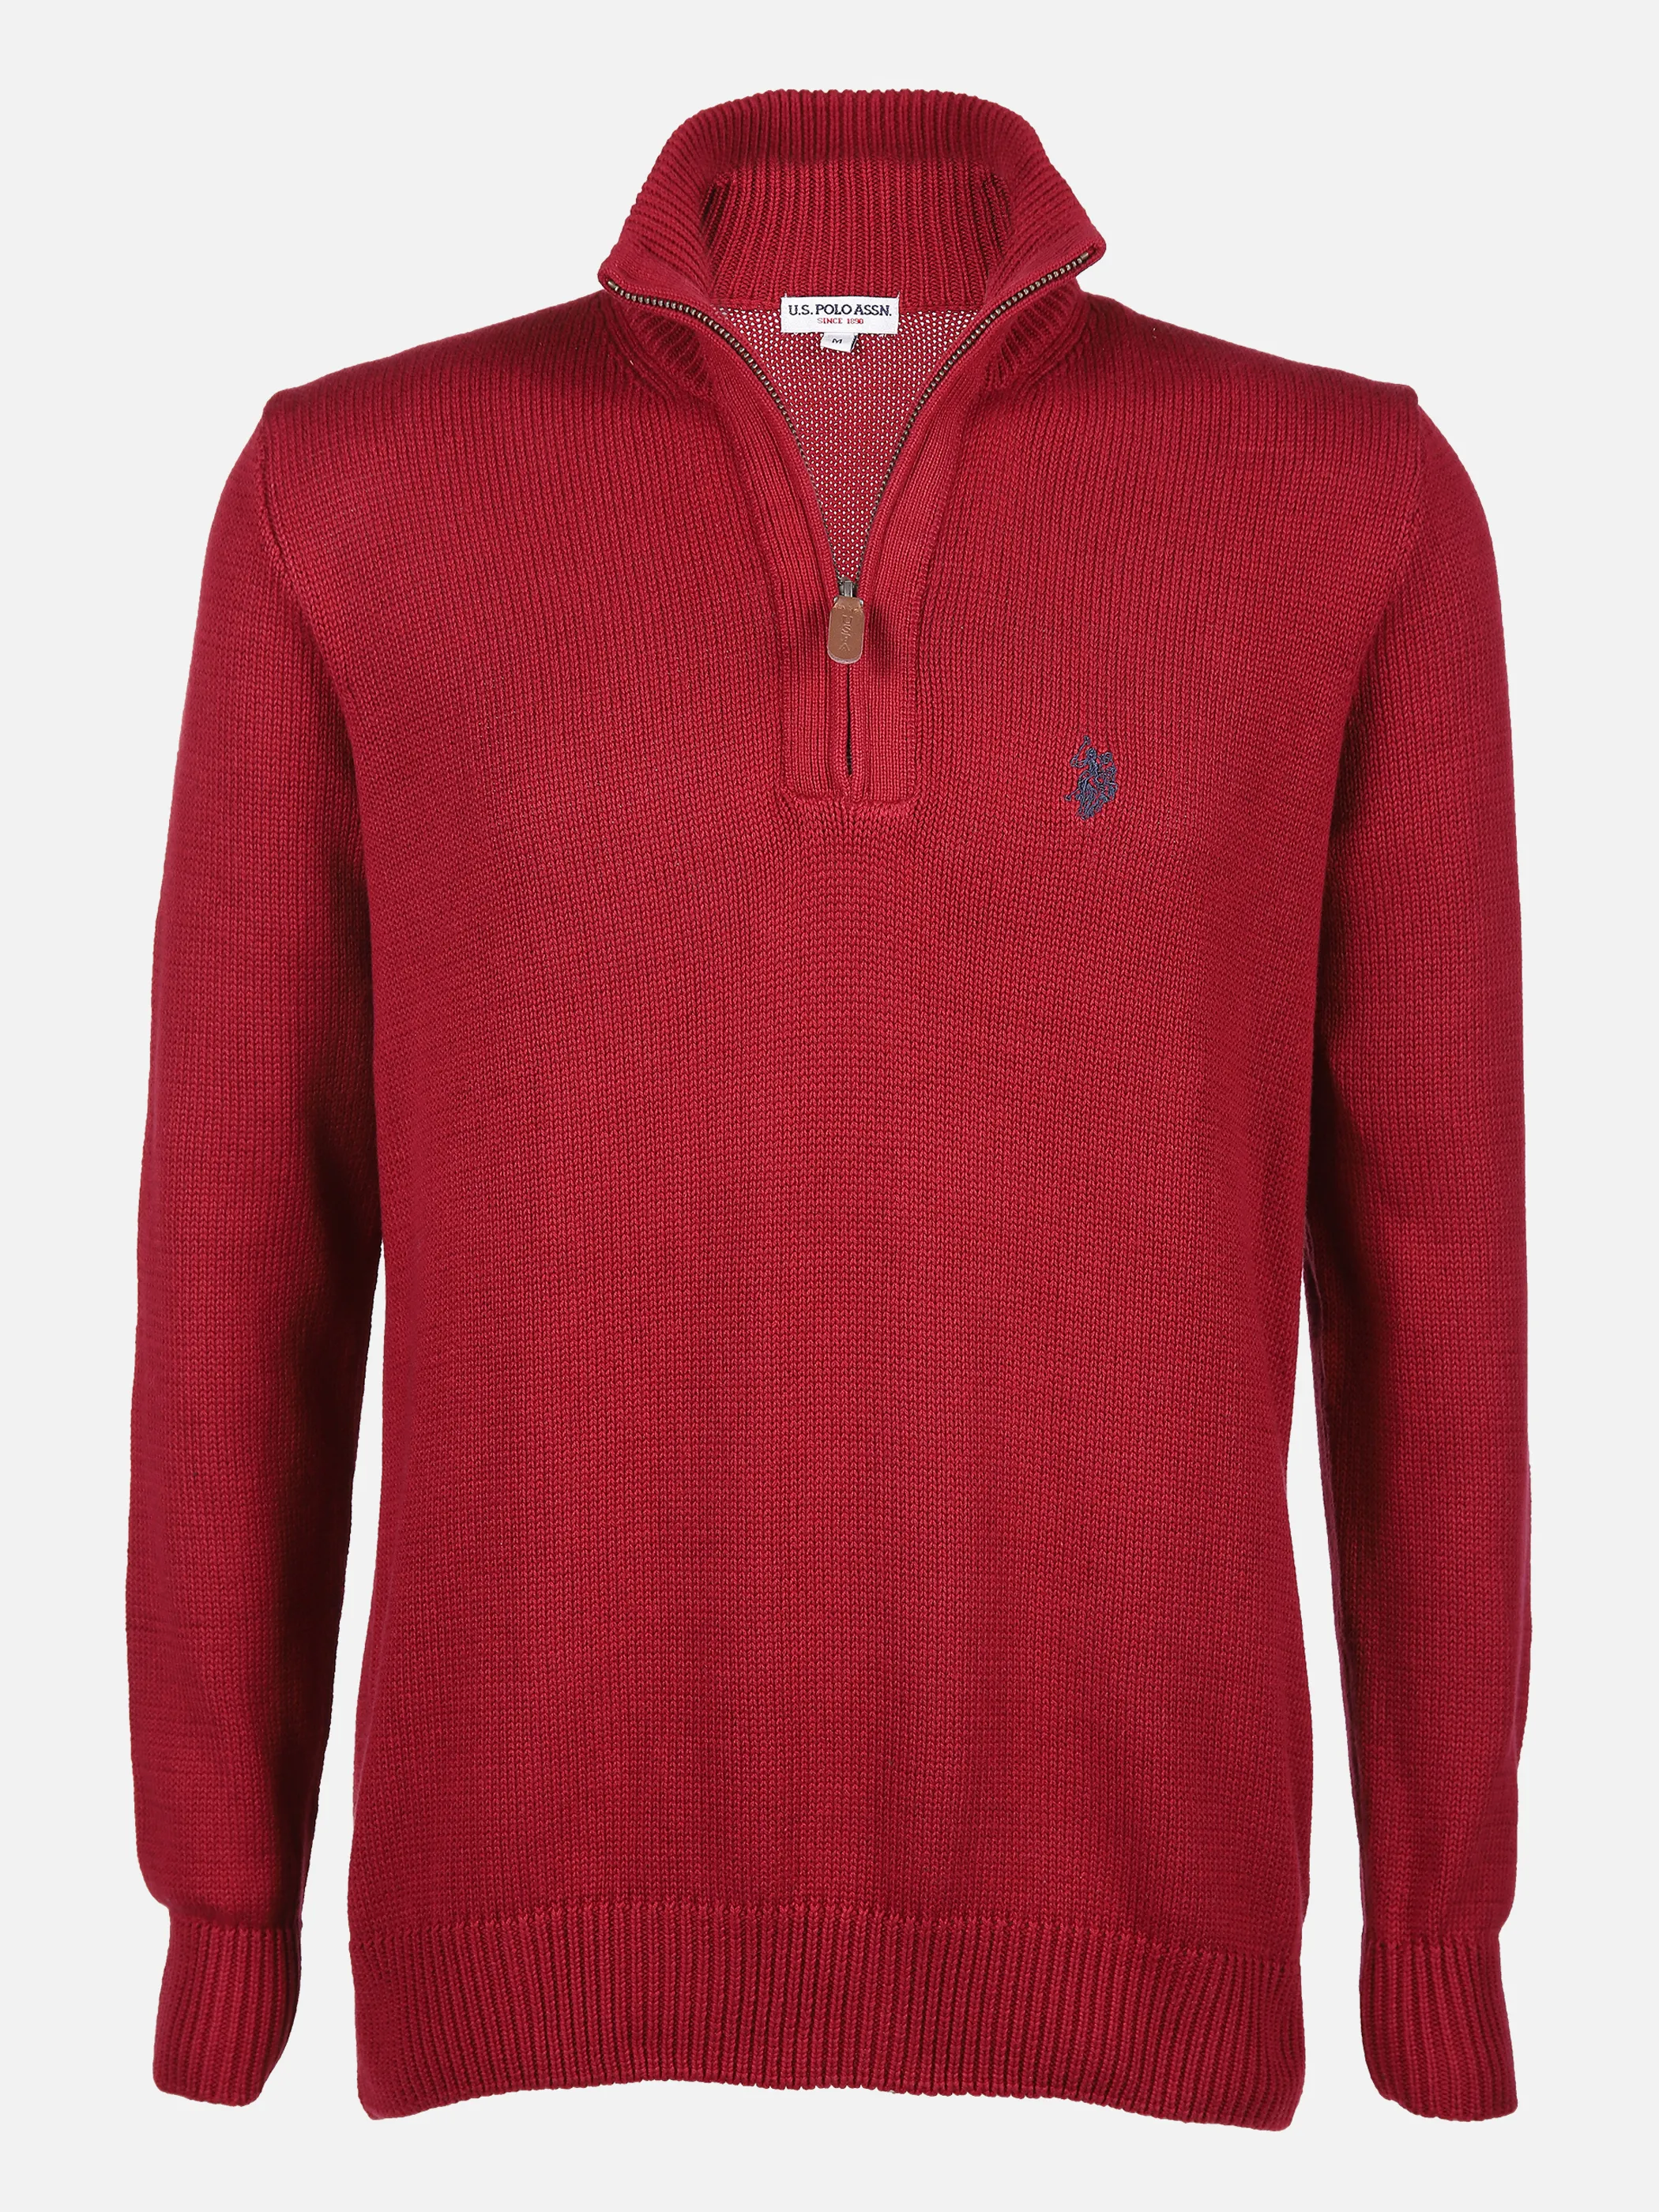 U.S. Polo Assn. He. Stricktroyer RV Rot 844687 DH´ROT 1